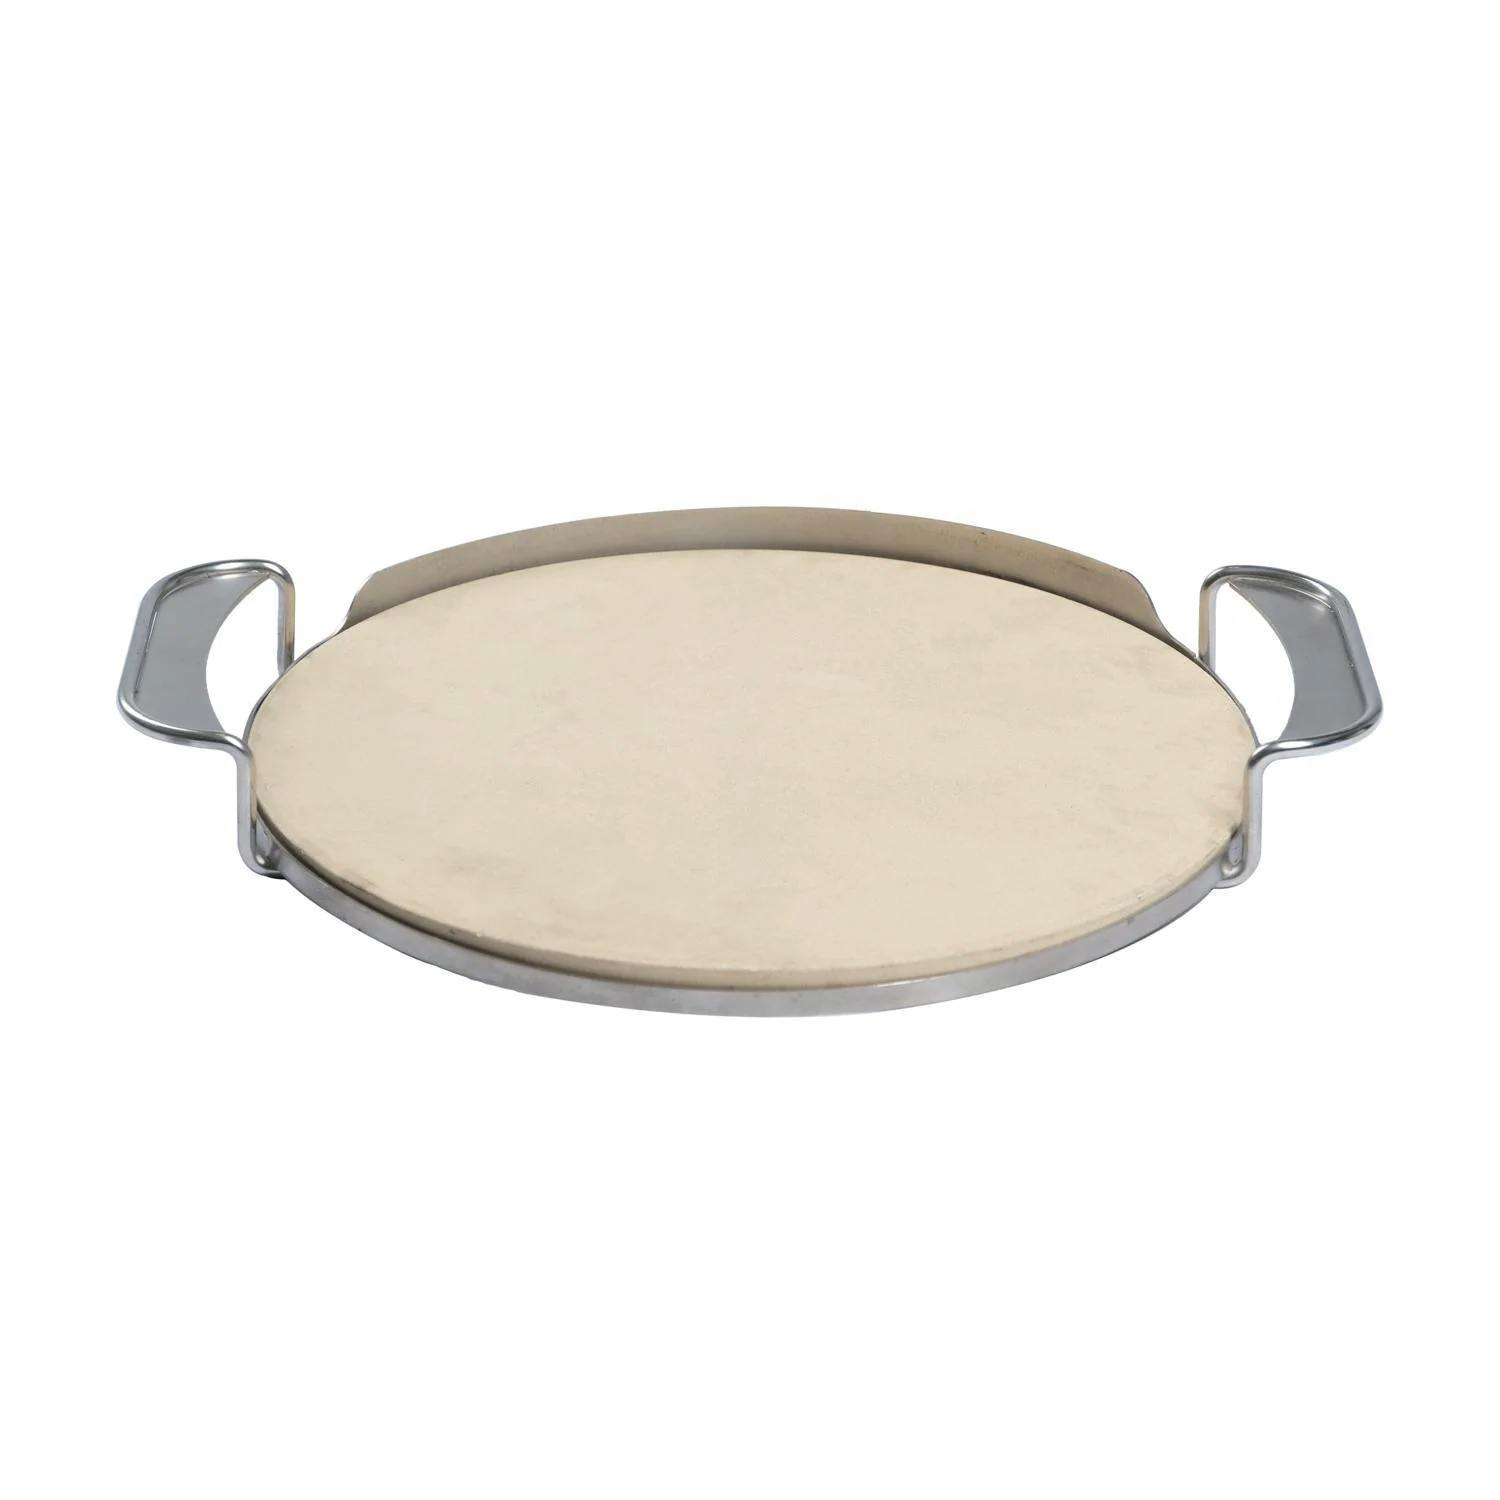 BBQGuys Signature Ceramic Pizza Stone With Stainless Steel Carry Rack